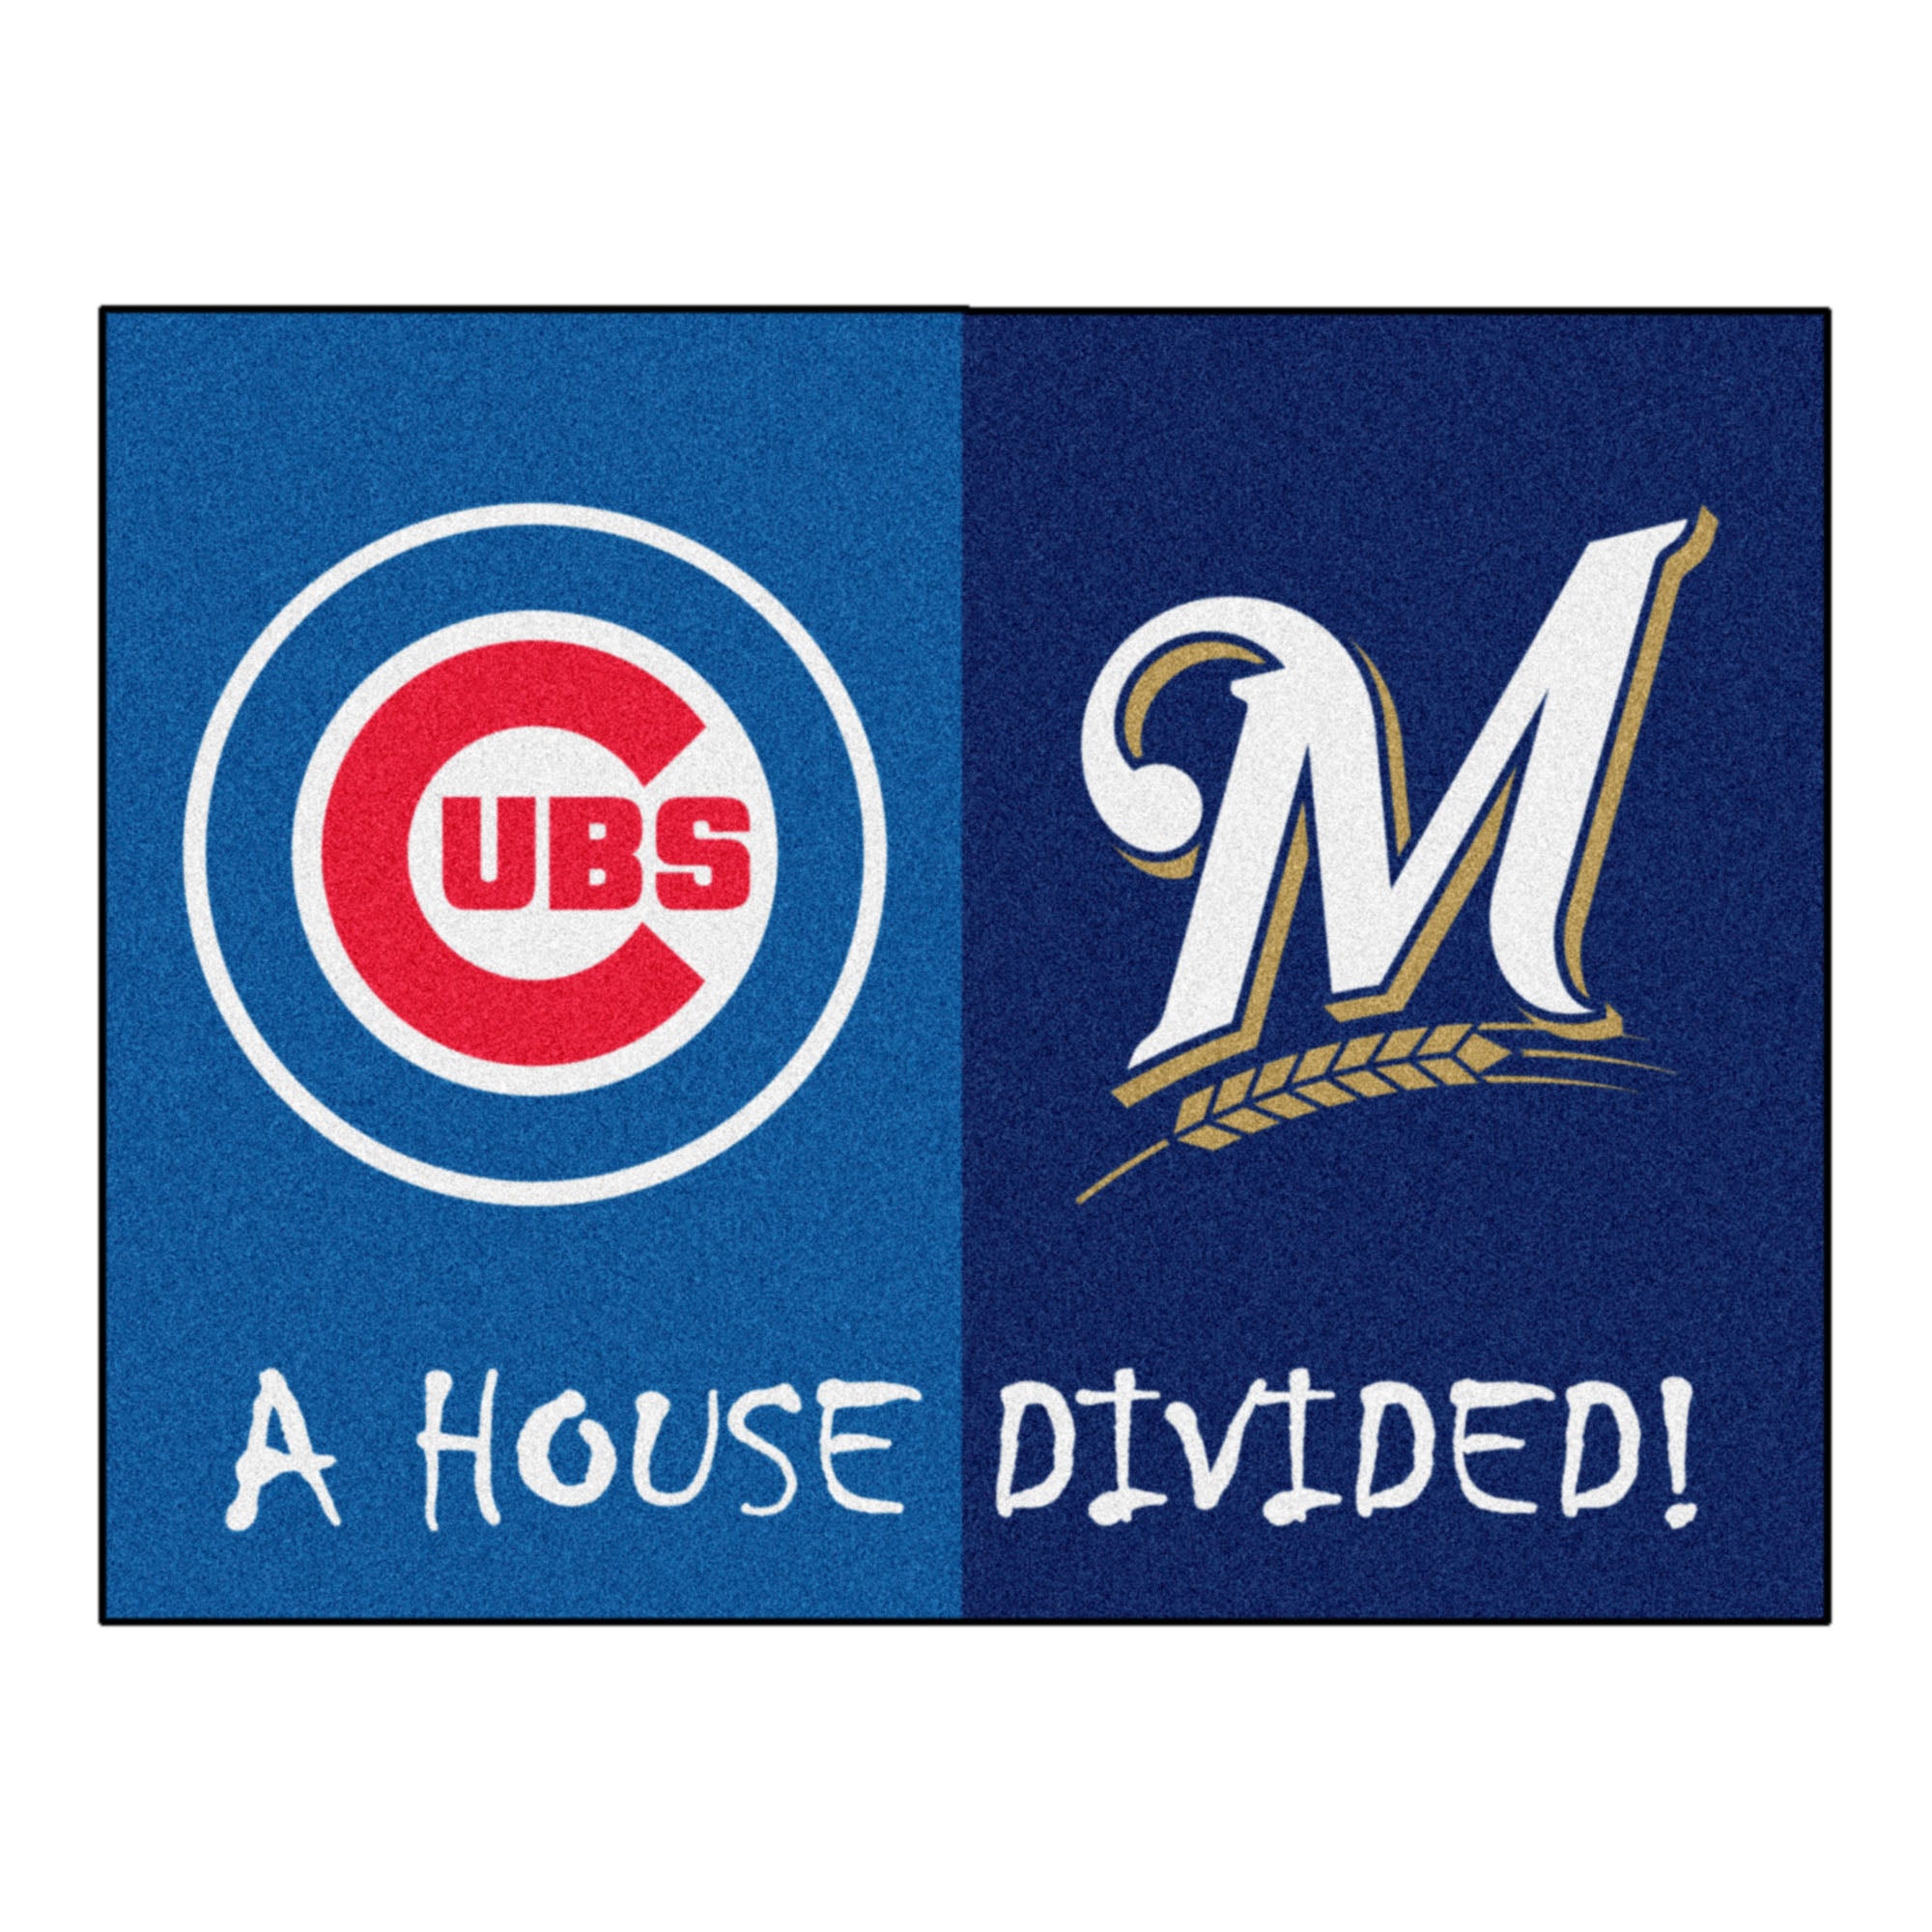 Fanmat - Mlb house divided - cubs / brewers house divided mat